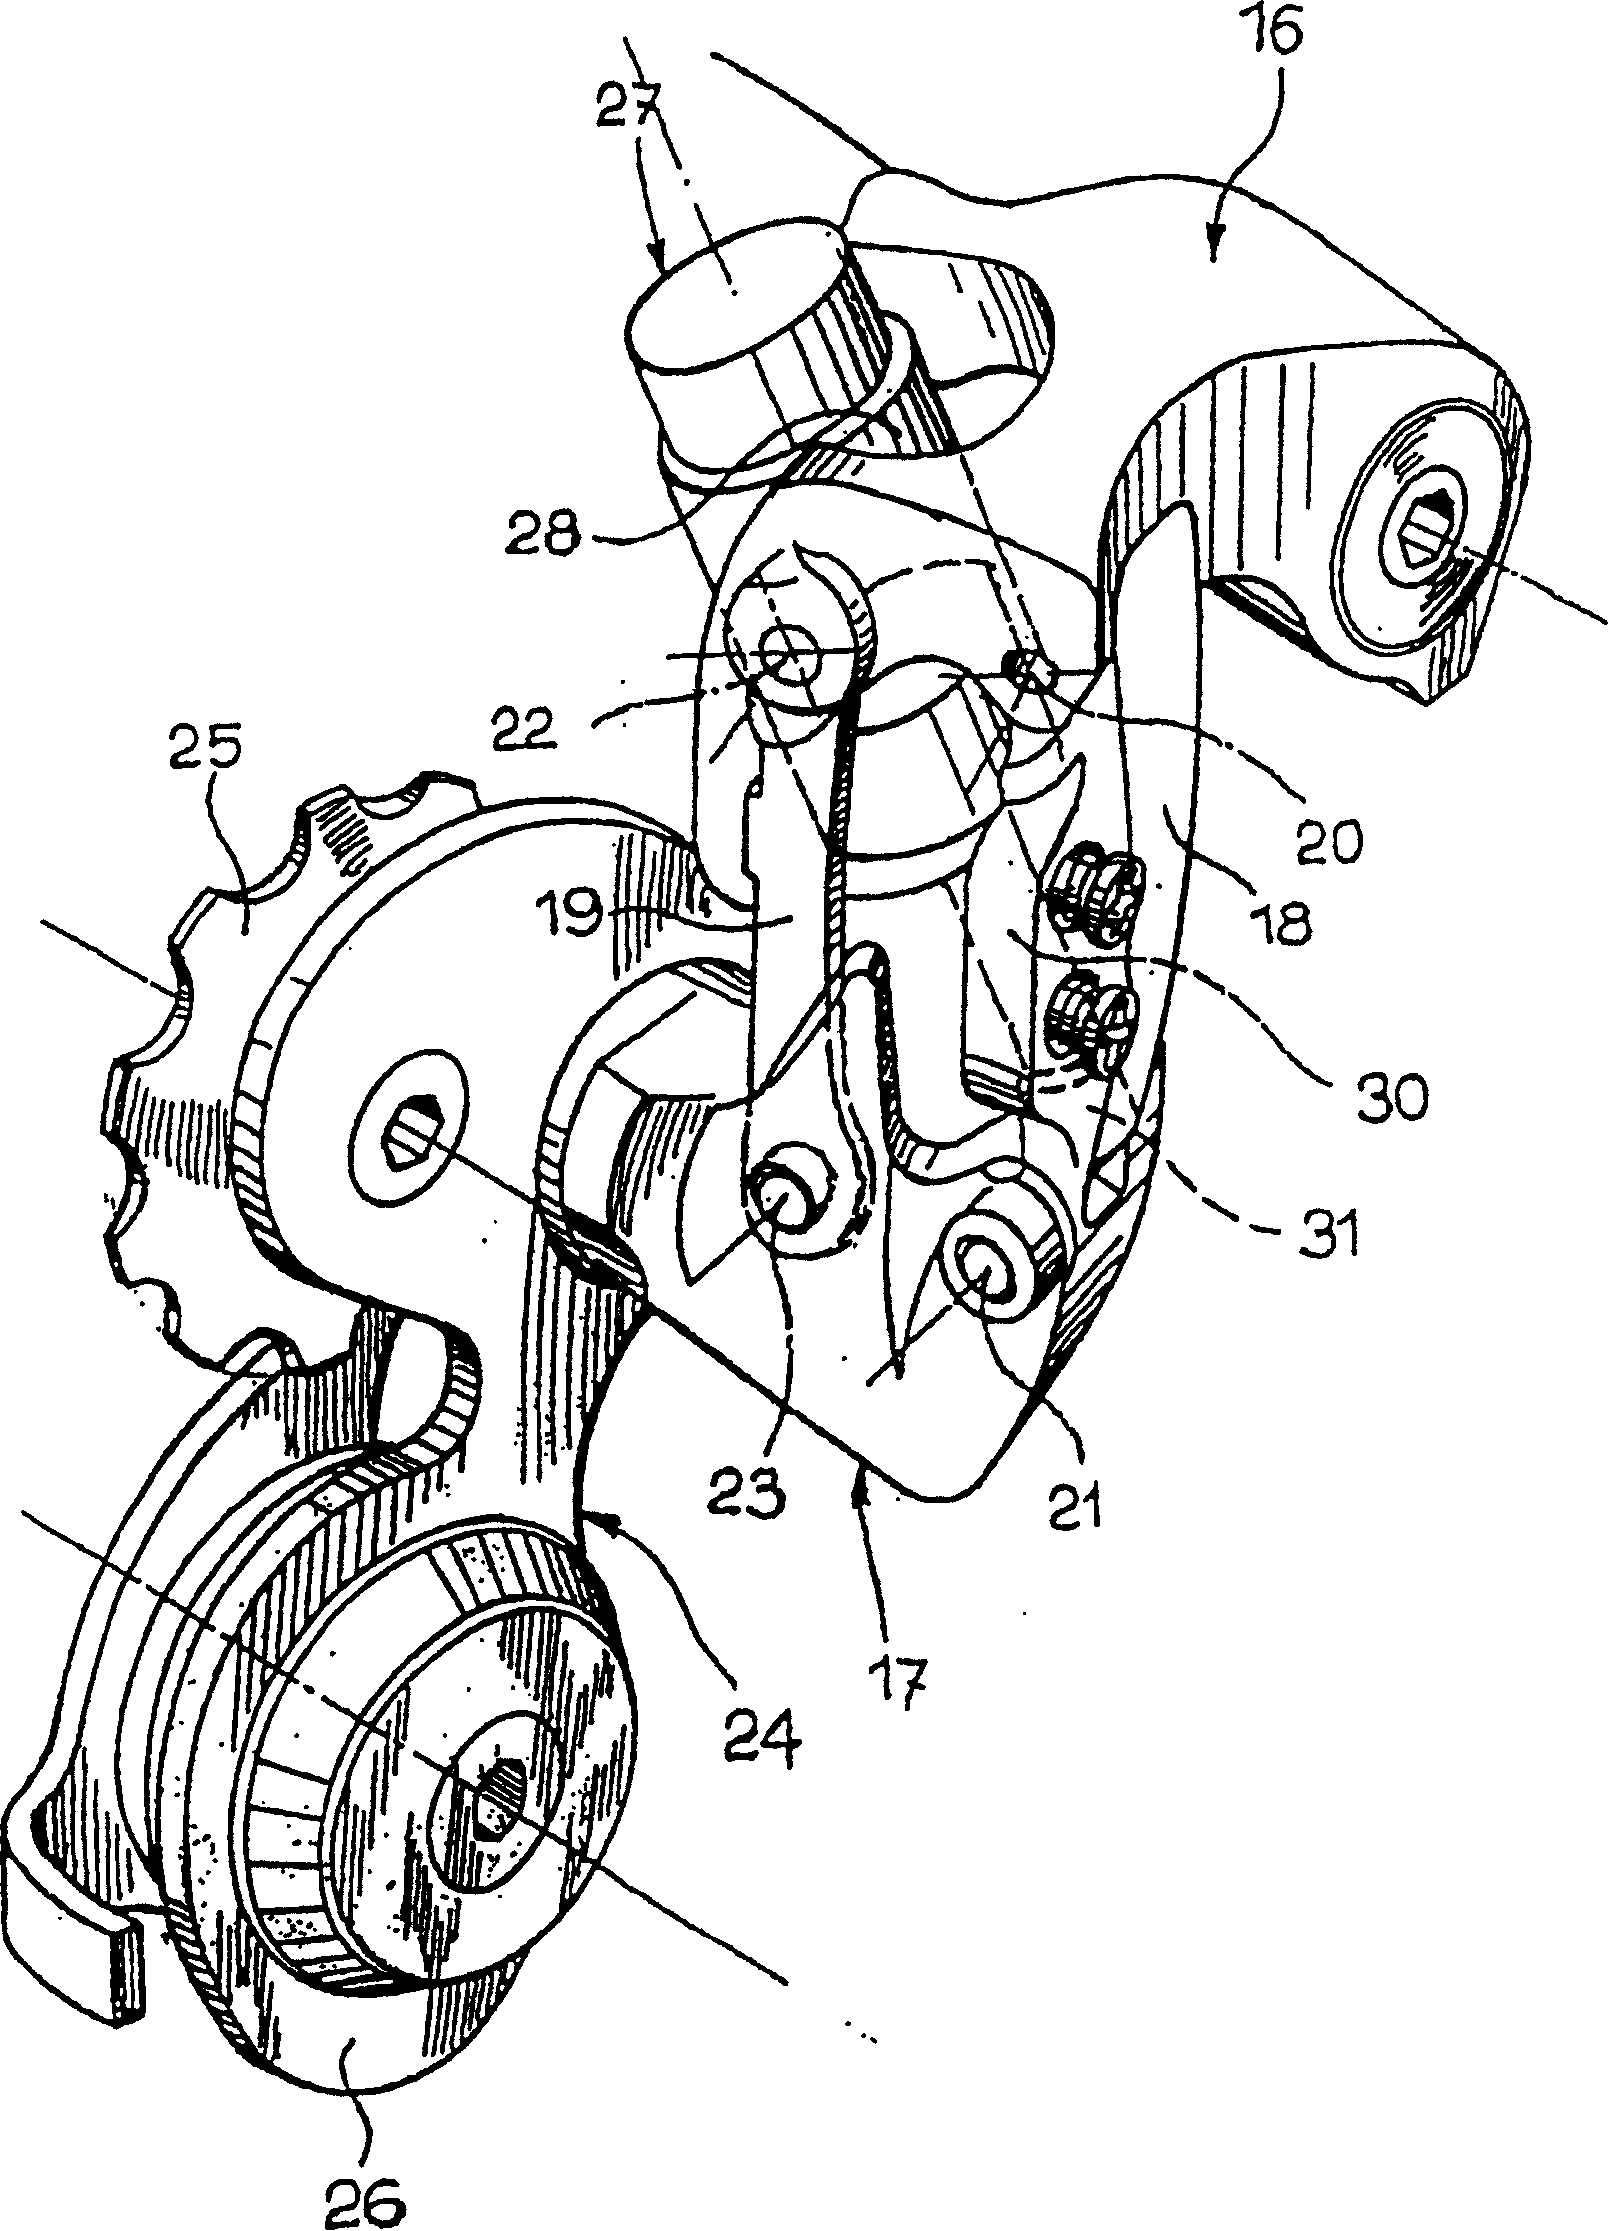 Gear shift device for bicycles